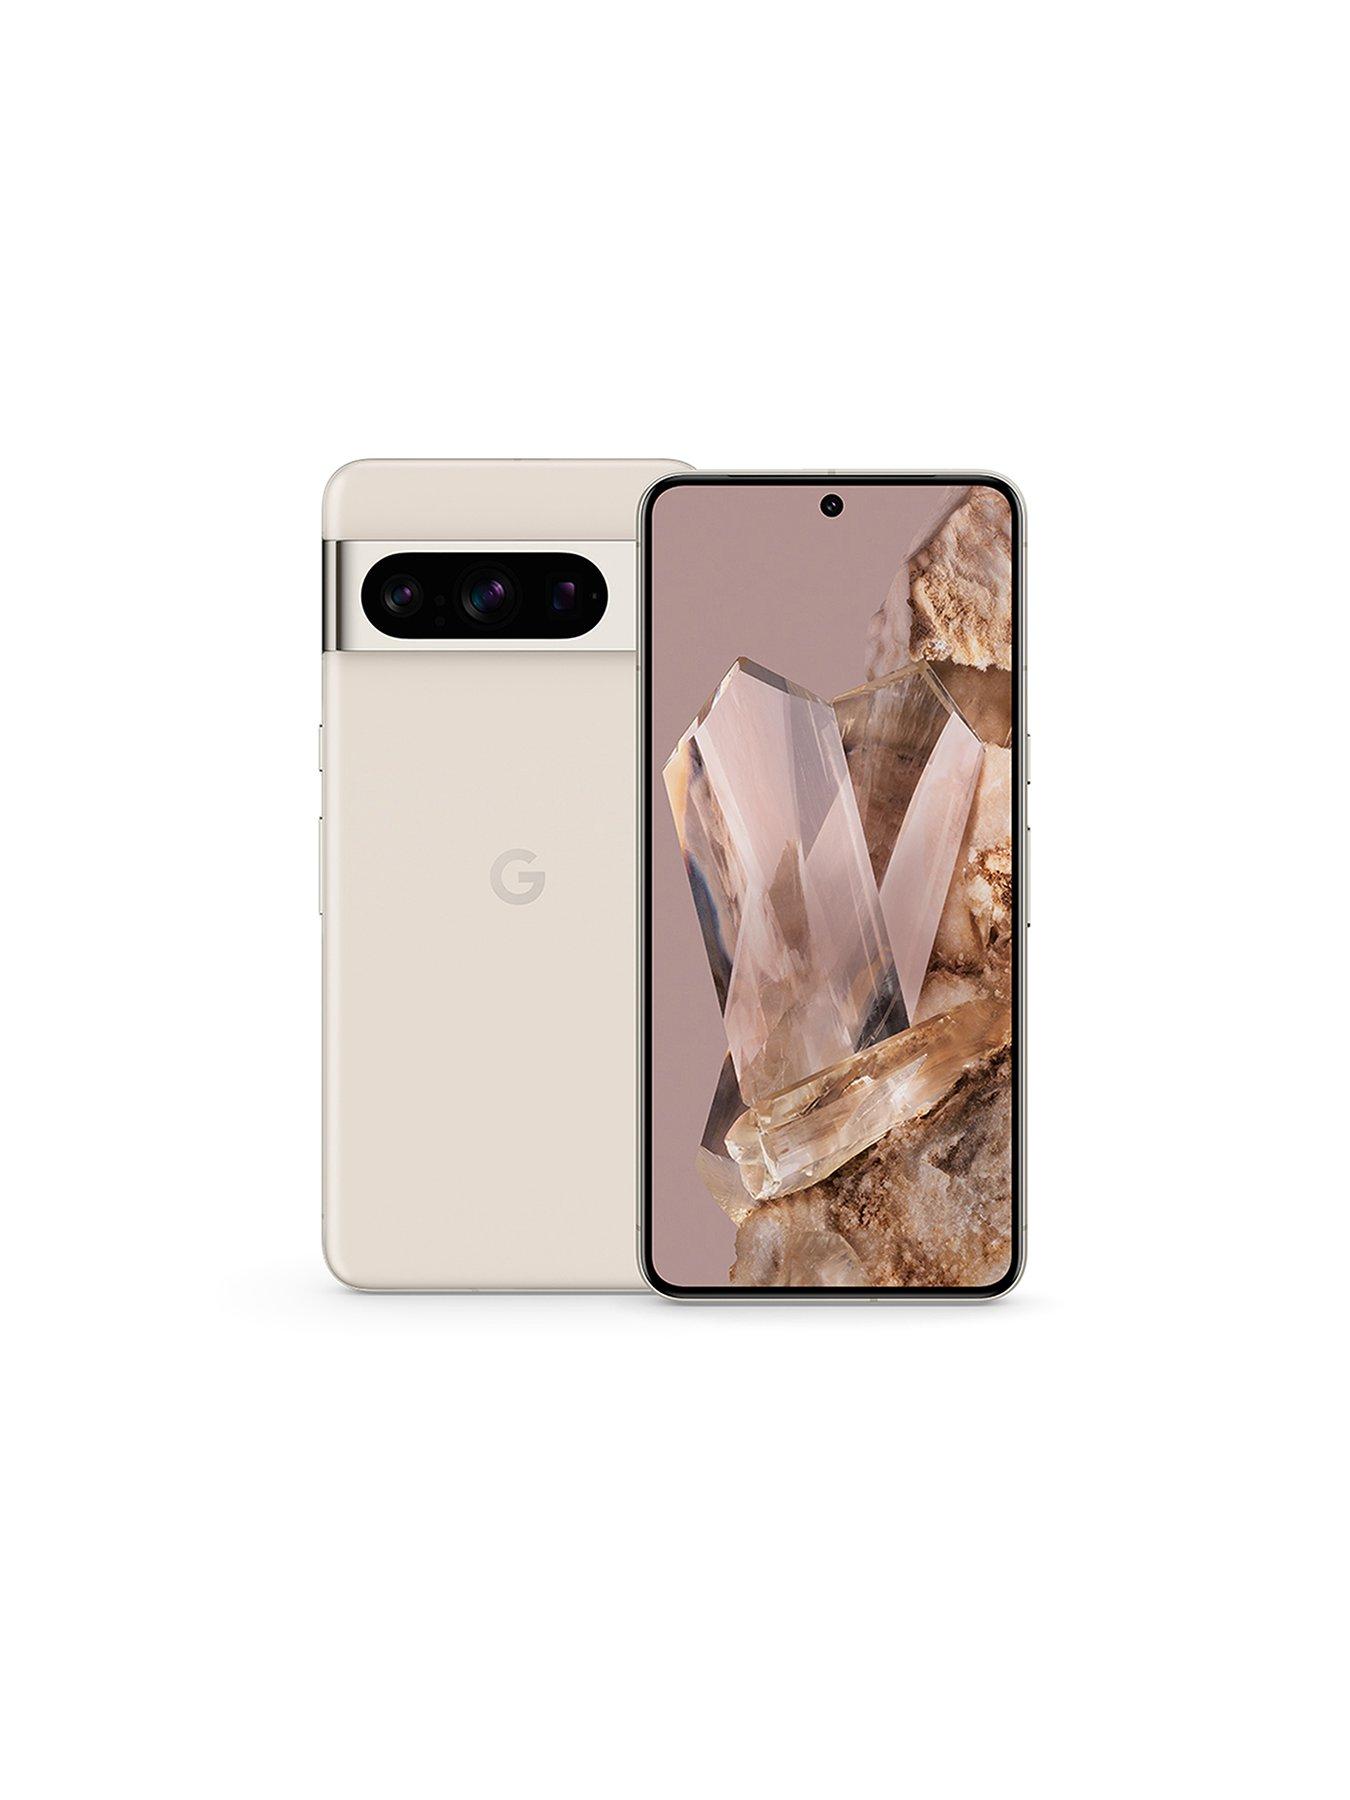 Pixel 7 Pro 256GB now $186 off at new all-time low, more